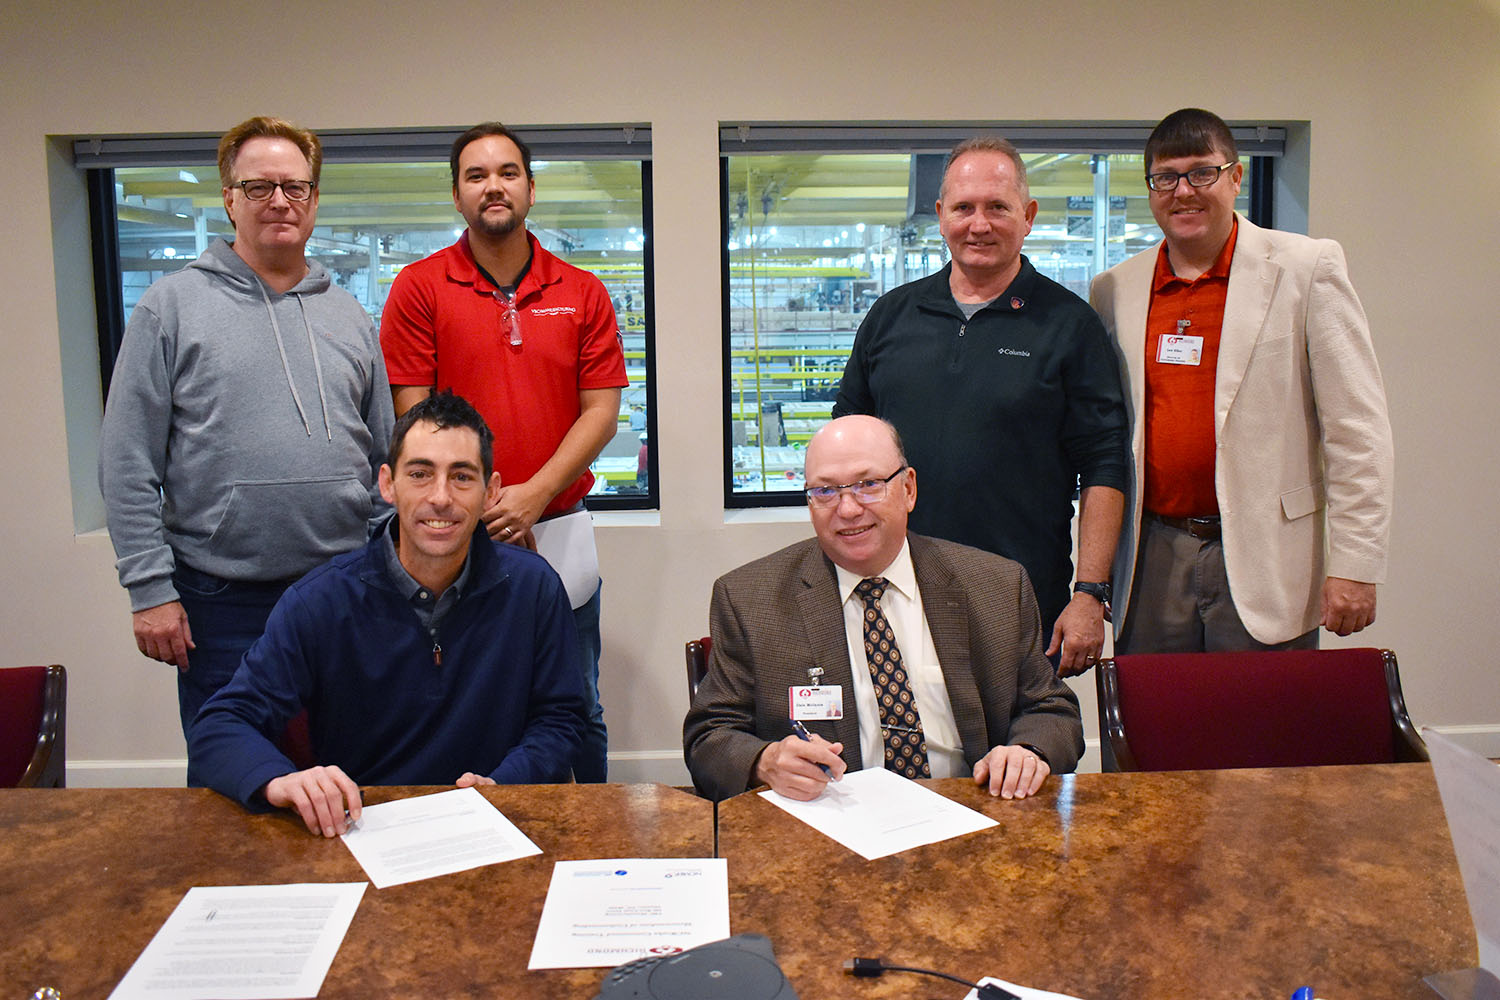 College leaders and upper management for VBC | Manufacturing sign a contract for training.